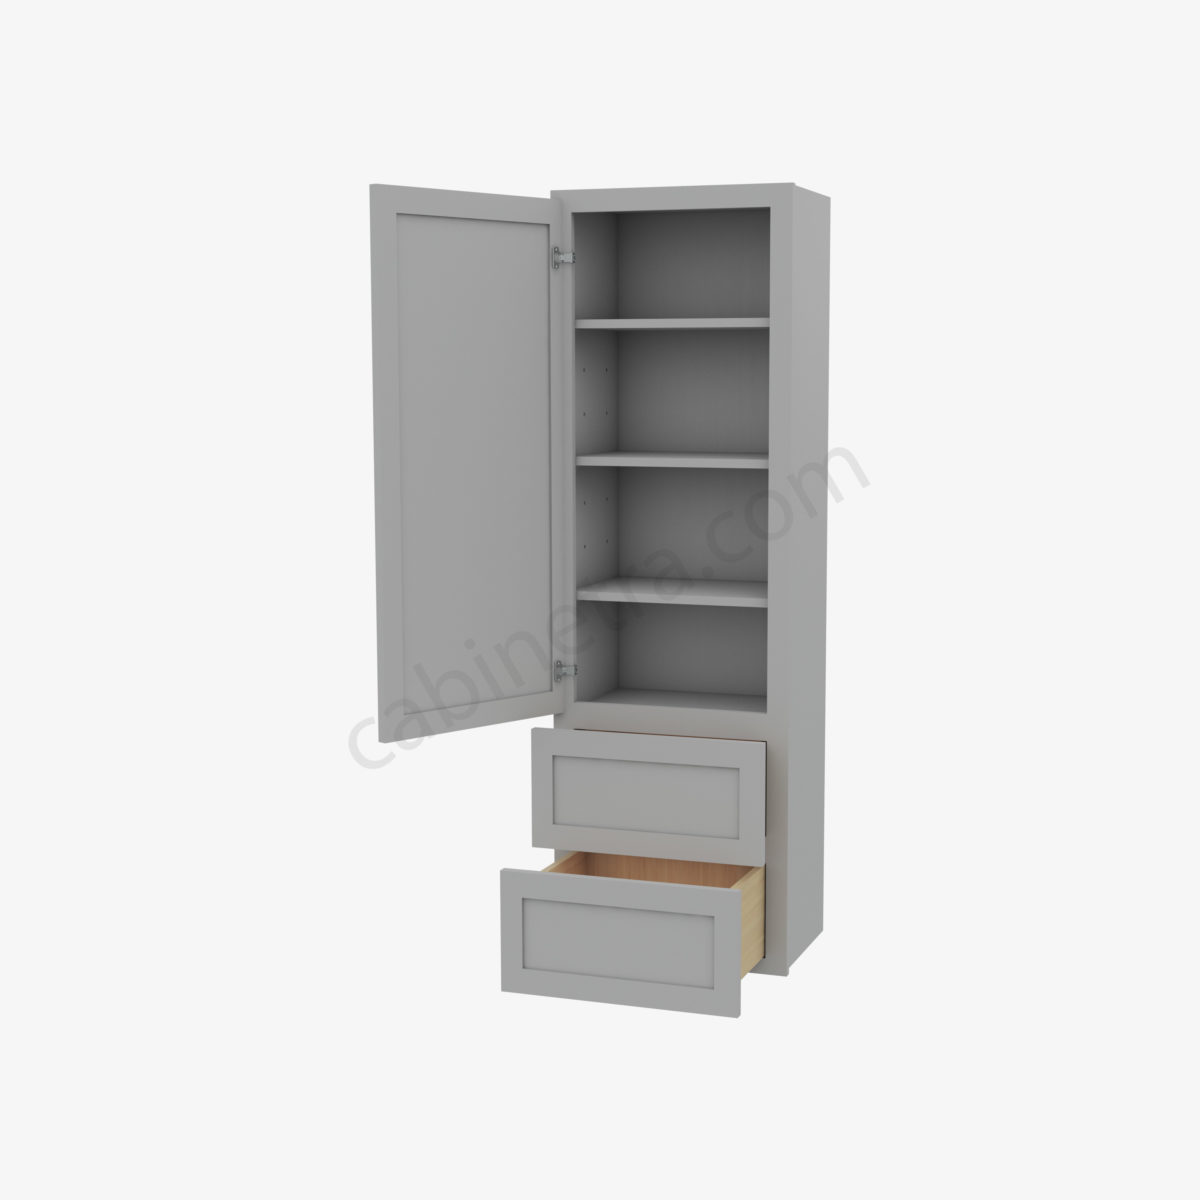 AB W2D1860 5 Forevermark Lait Gray Shaker Cabinetra scaled